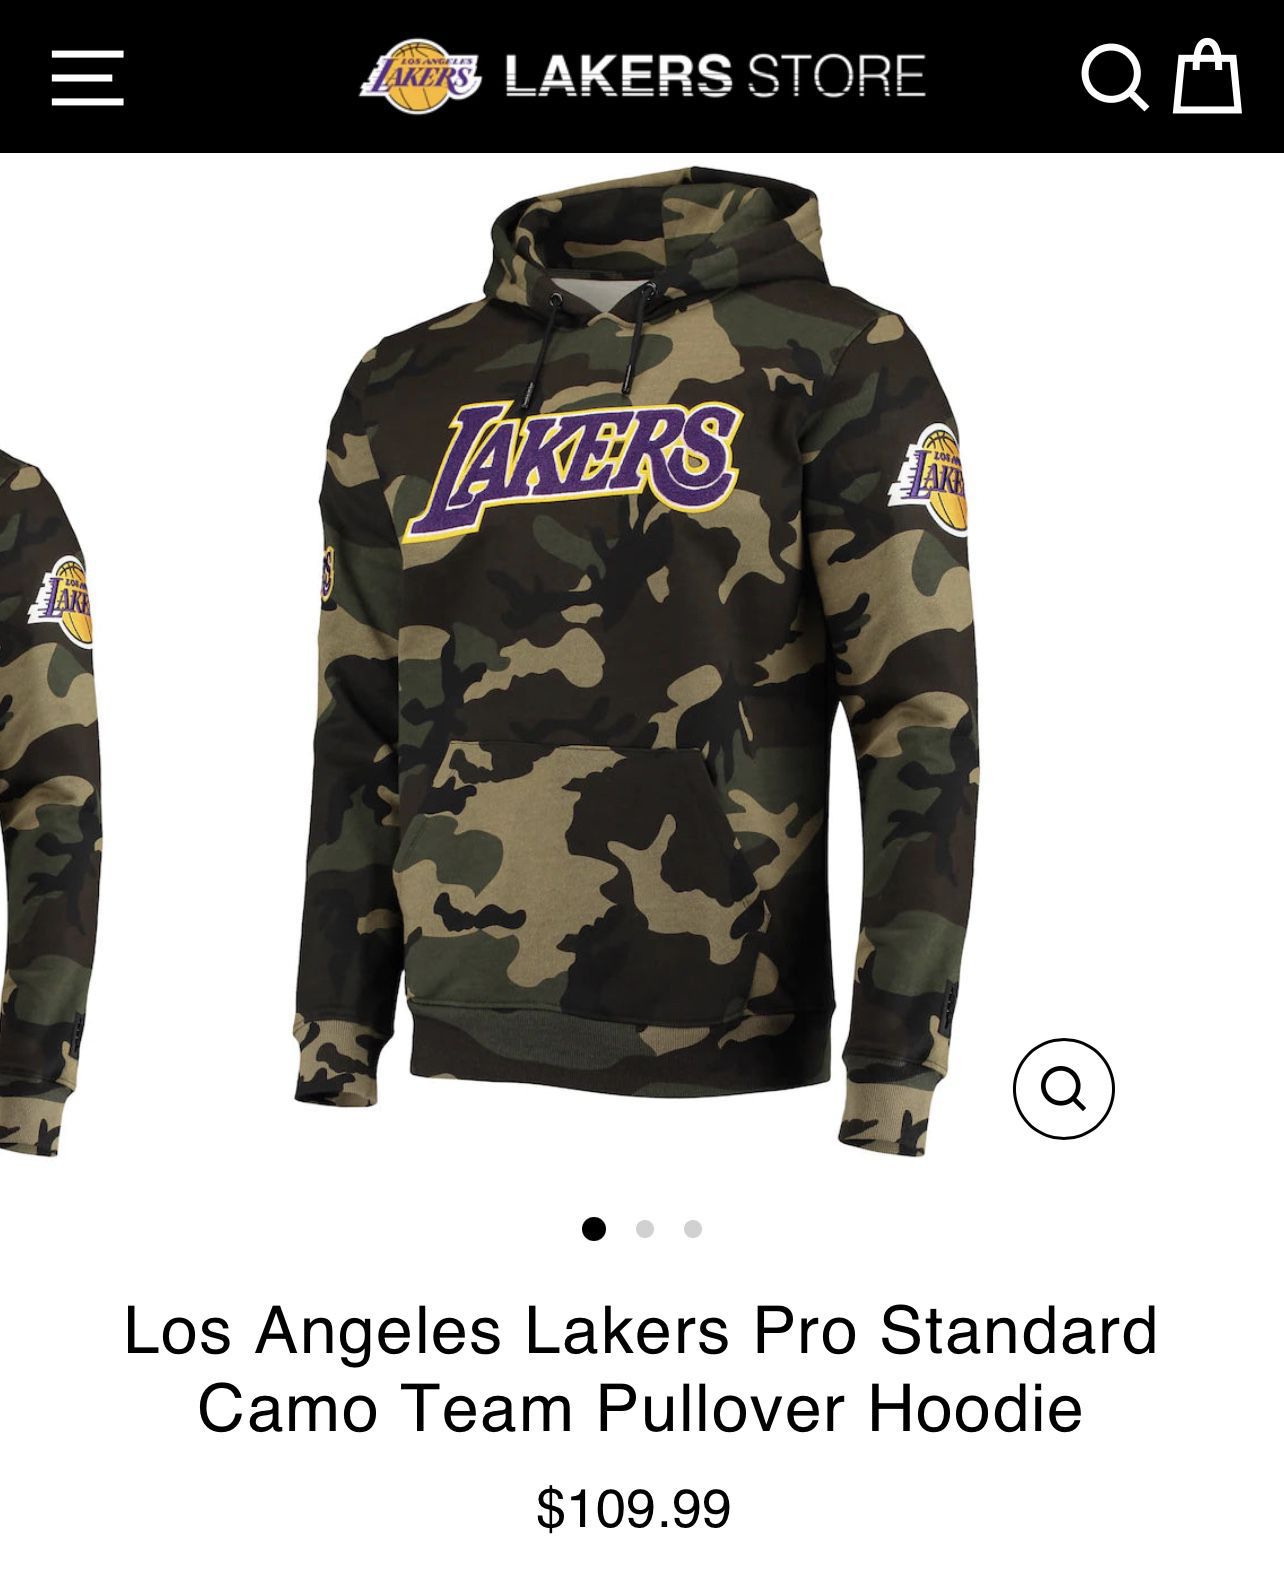 Los Angeles Lakers Camo Team Pullover Hoodie for Sale in Irvine, CA -  OfferUp